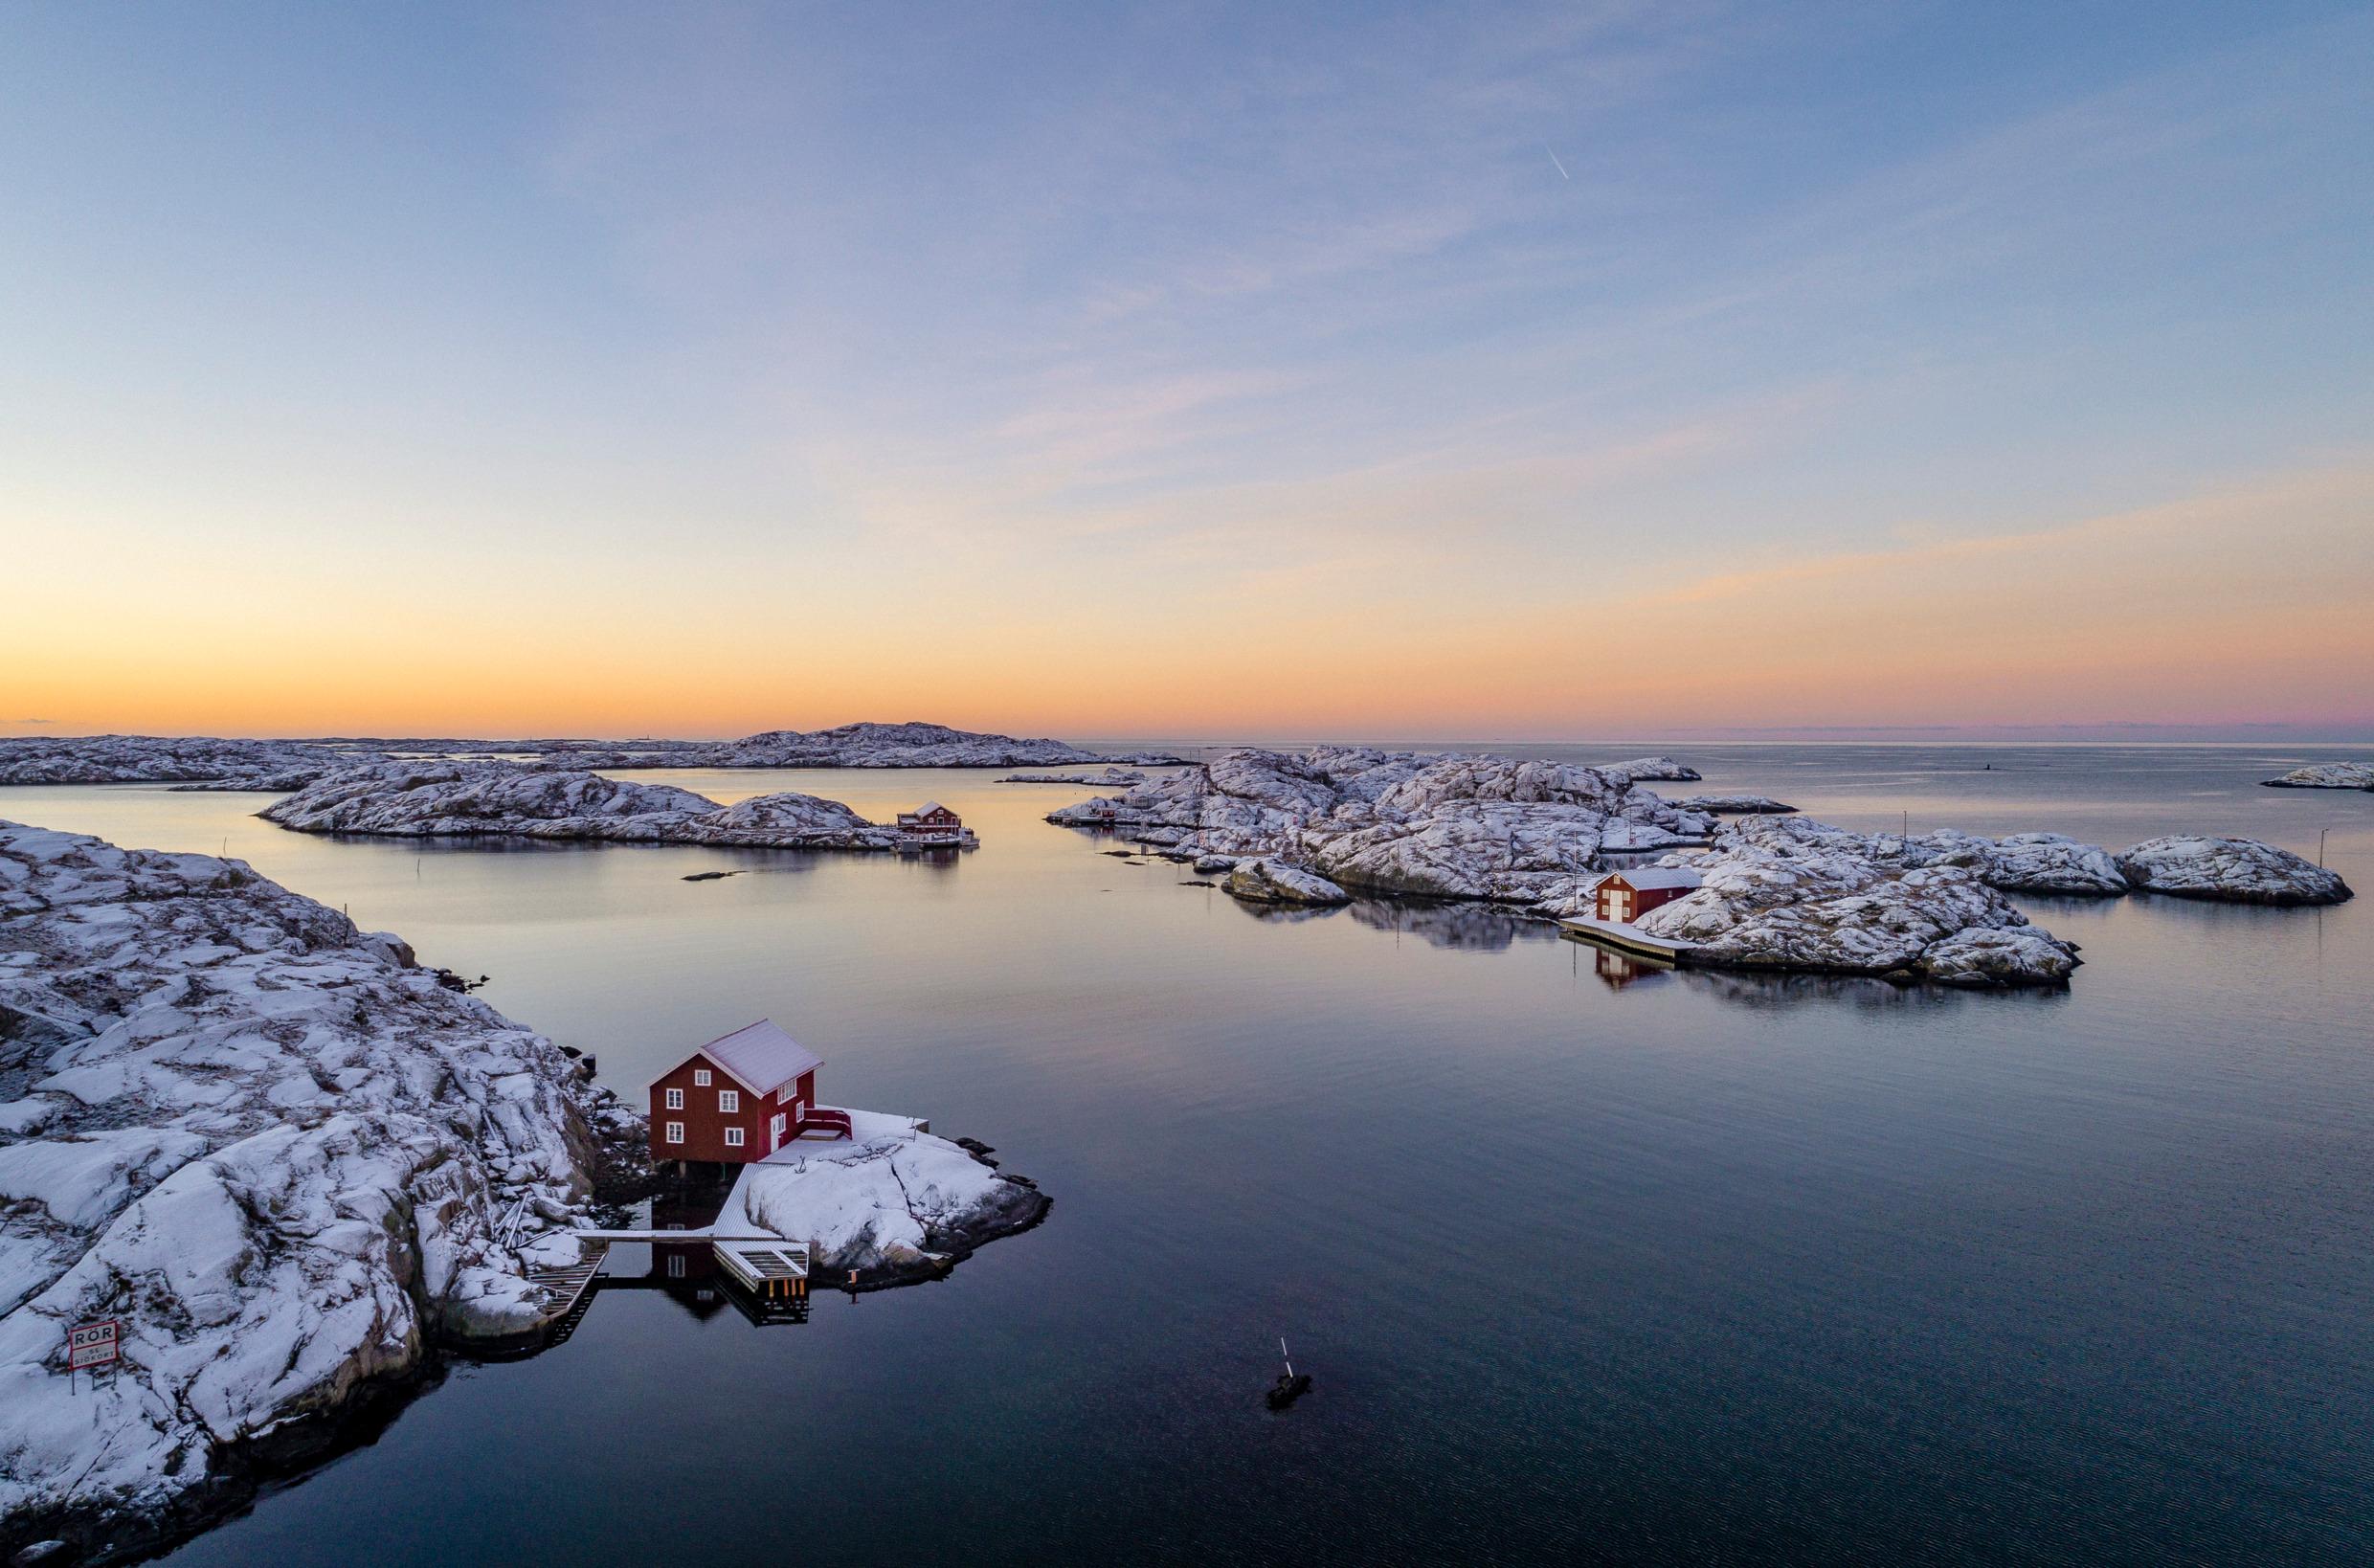 A view of Sweden's west coast archipelago during winter.